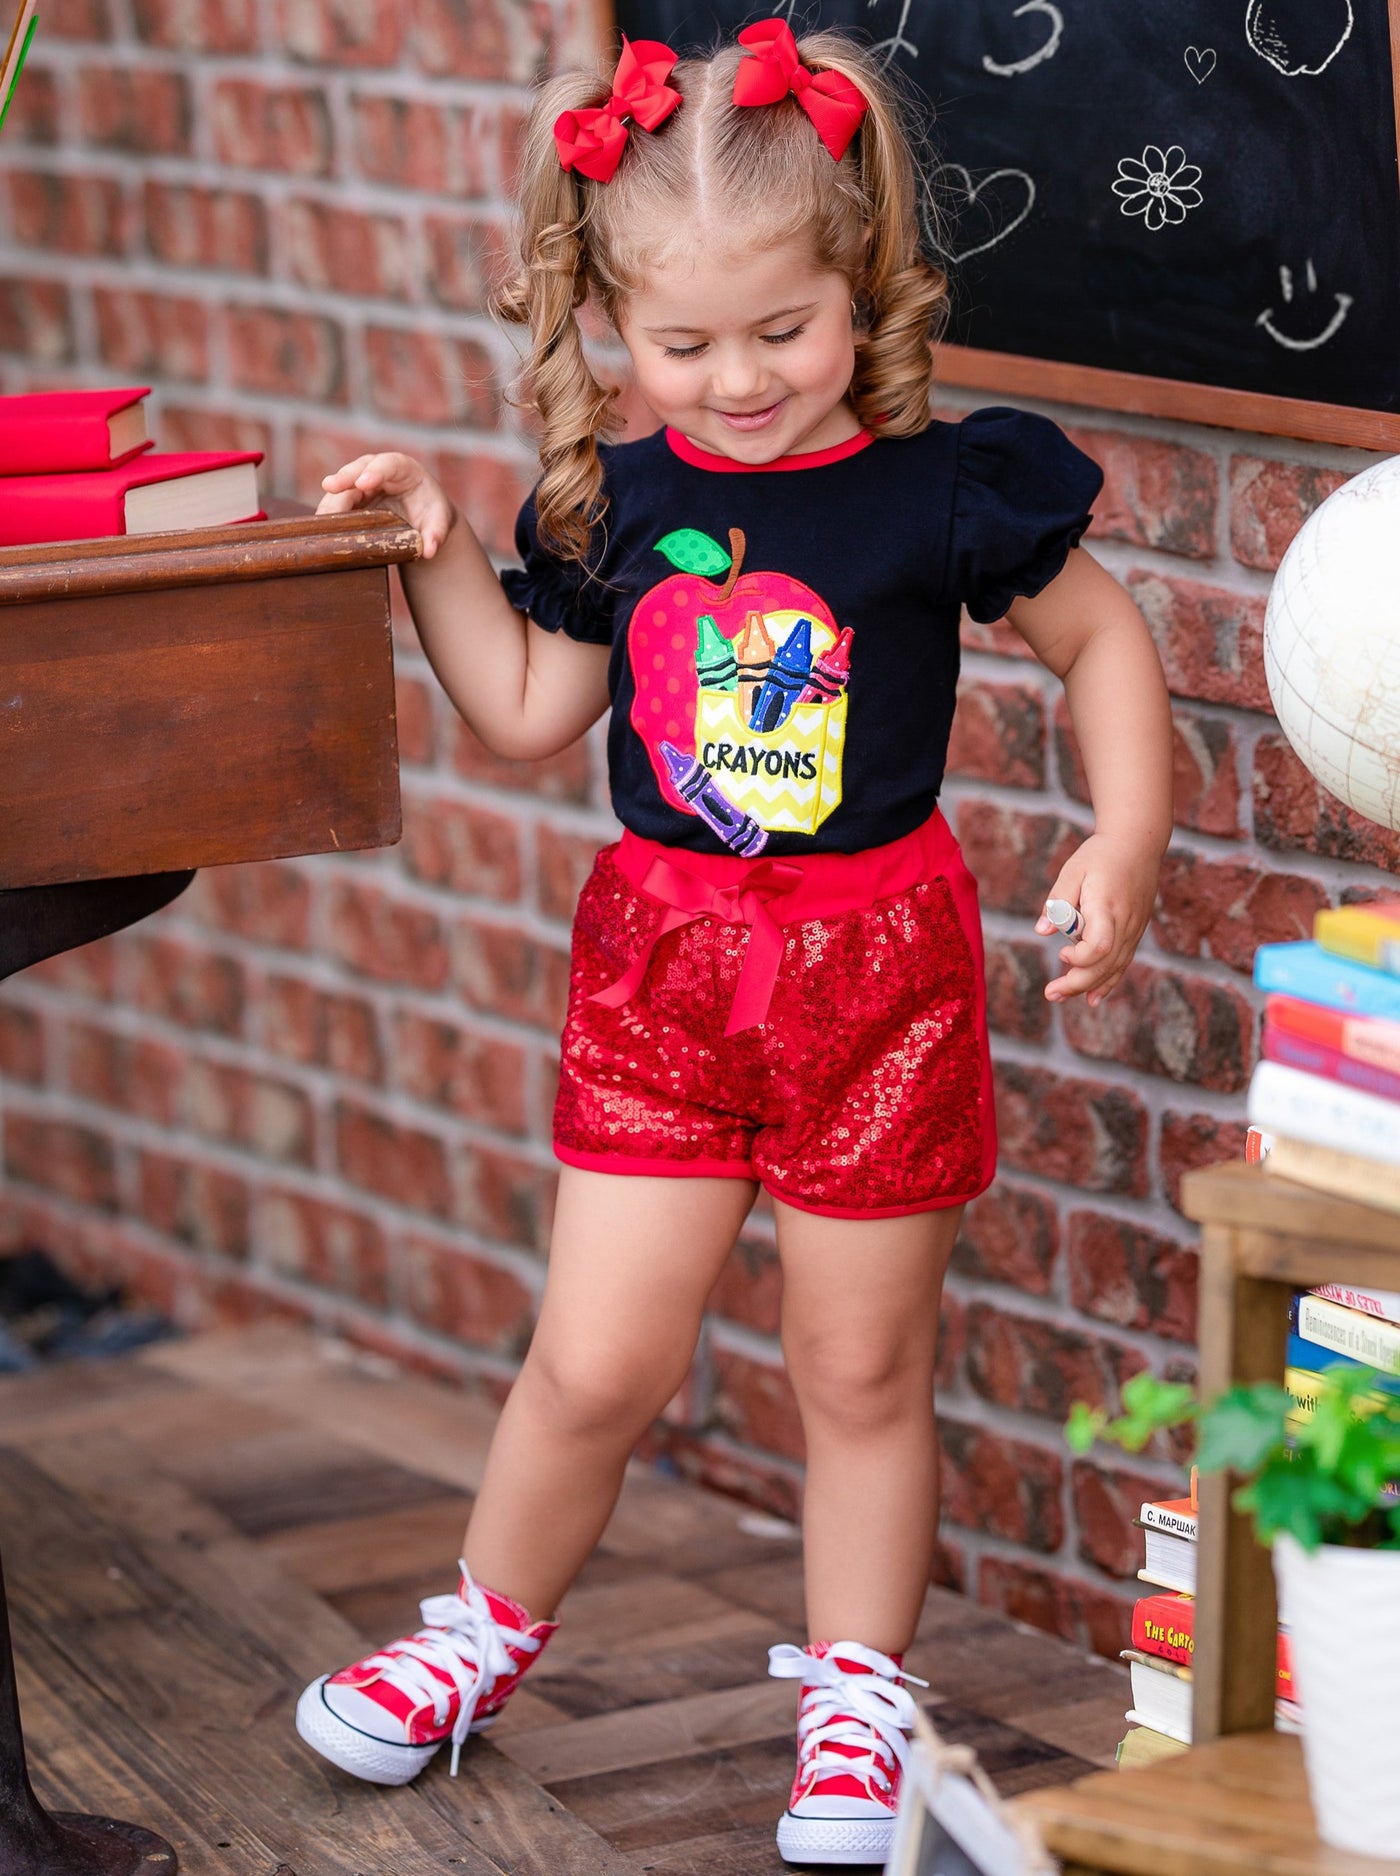 Little girls back to school apple and crayon graphic top with puffed short sleeves and sequin mesh shorts with bow - Mia Belle Girls